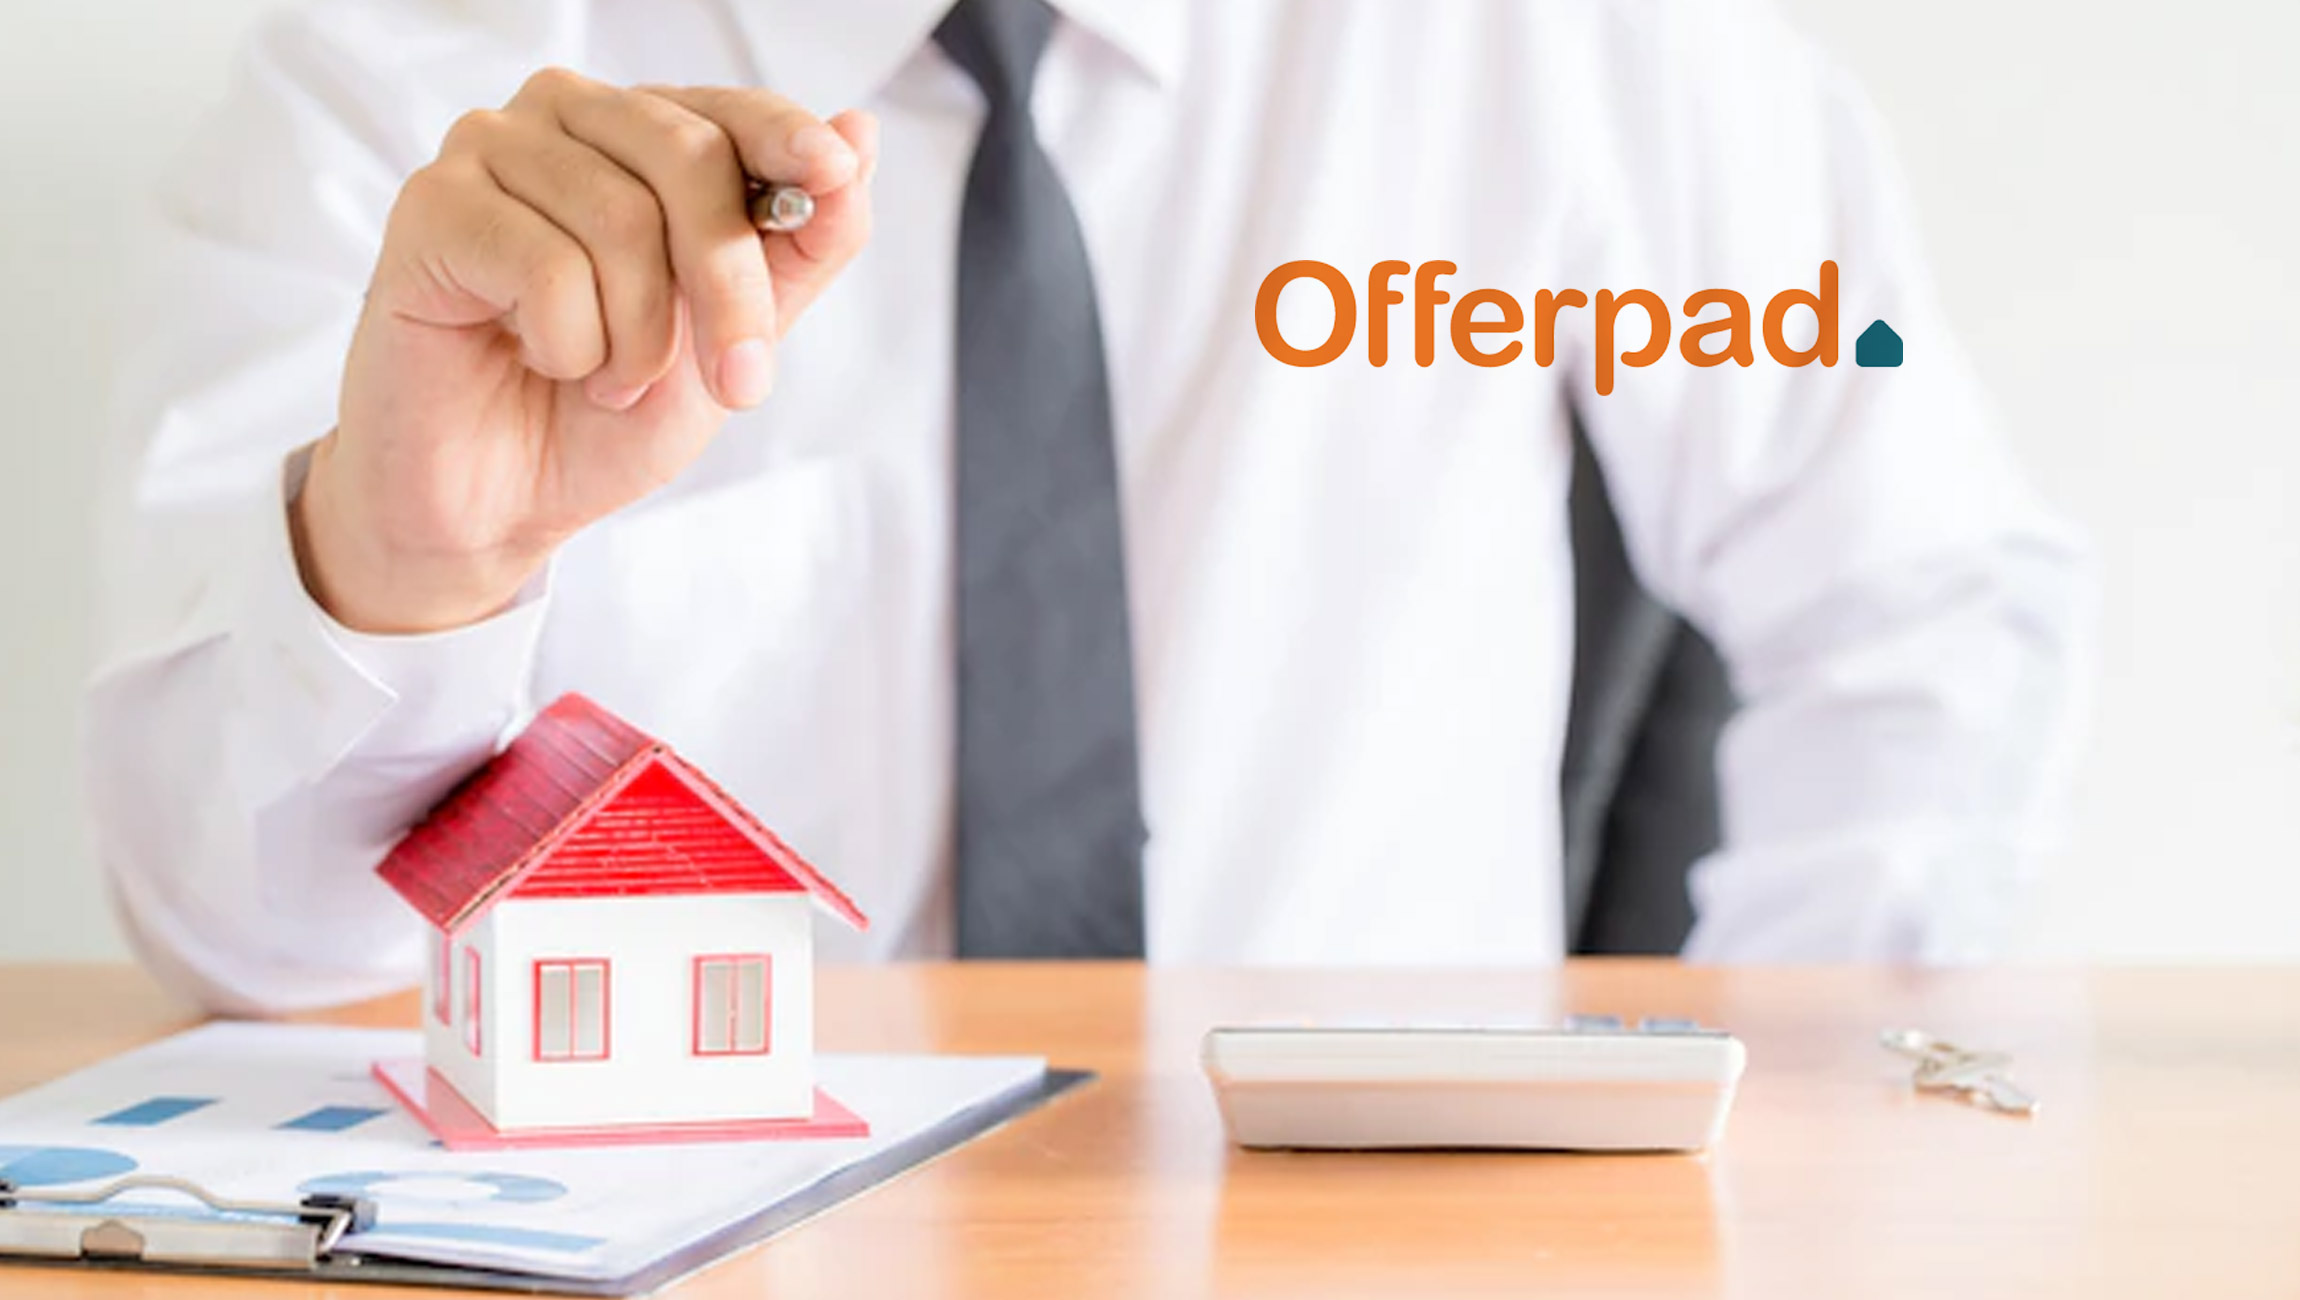 Offerpad Helps Simplify the Home Mortgage Experience with New Mobile App